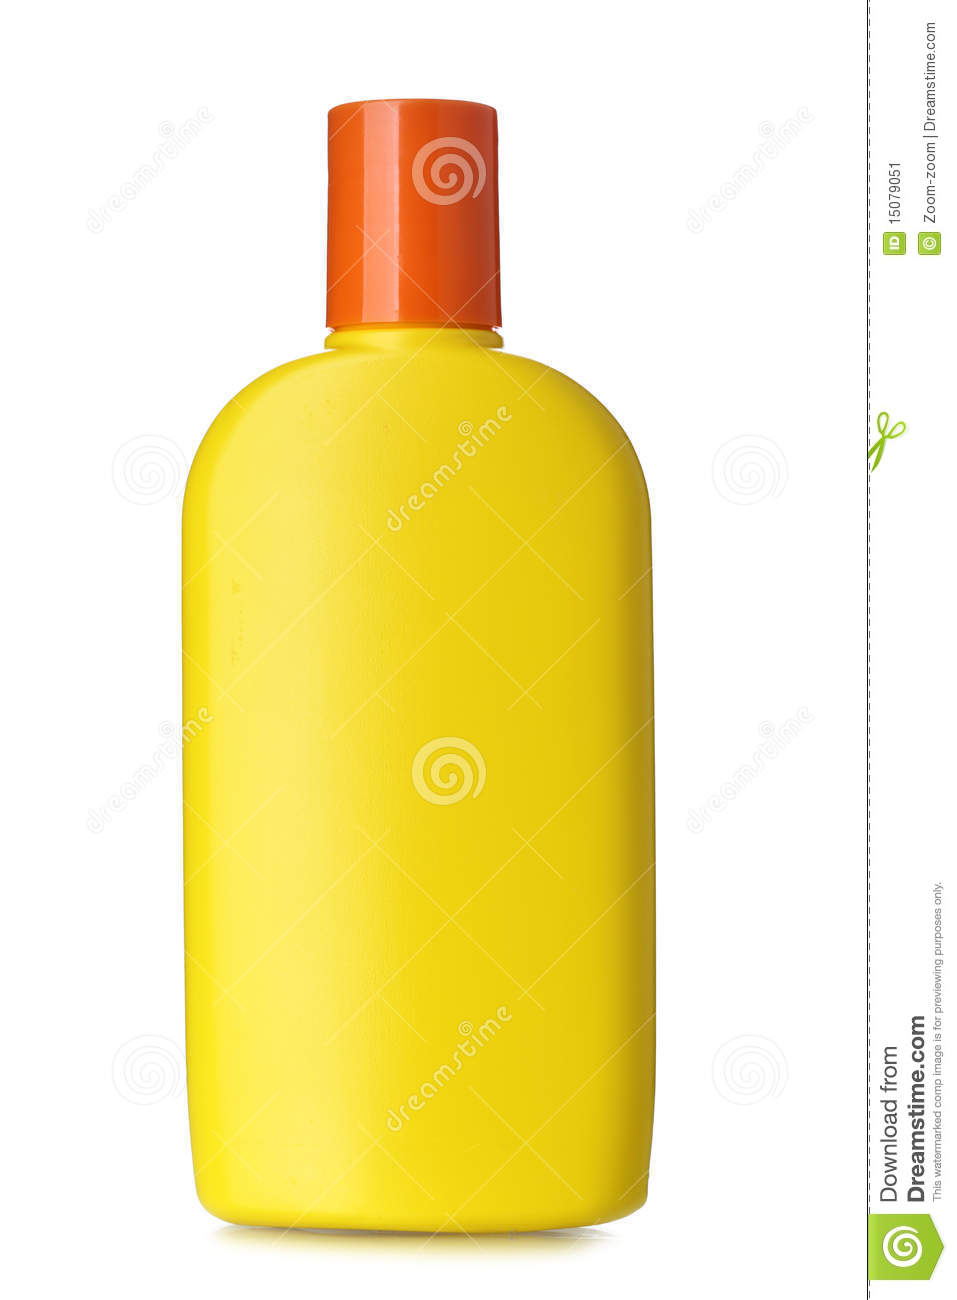 Bottle Of Sunscreen Isolated Over The White Background 